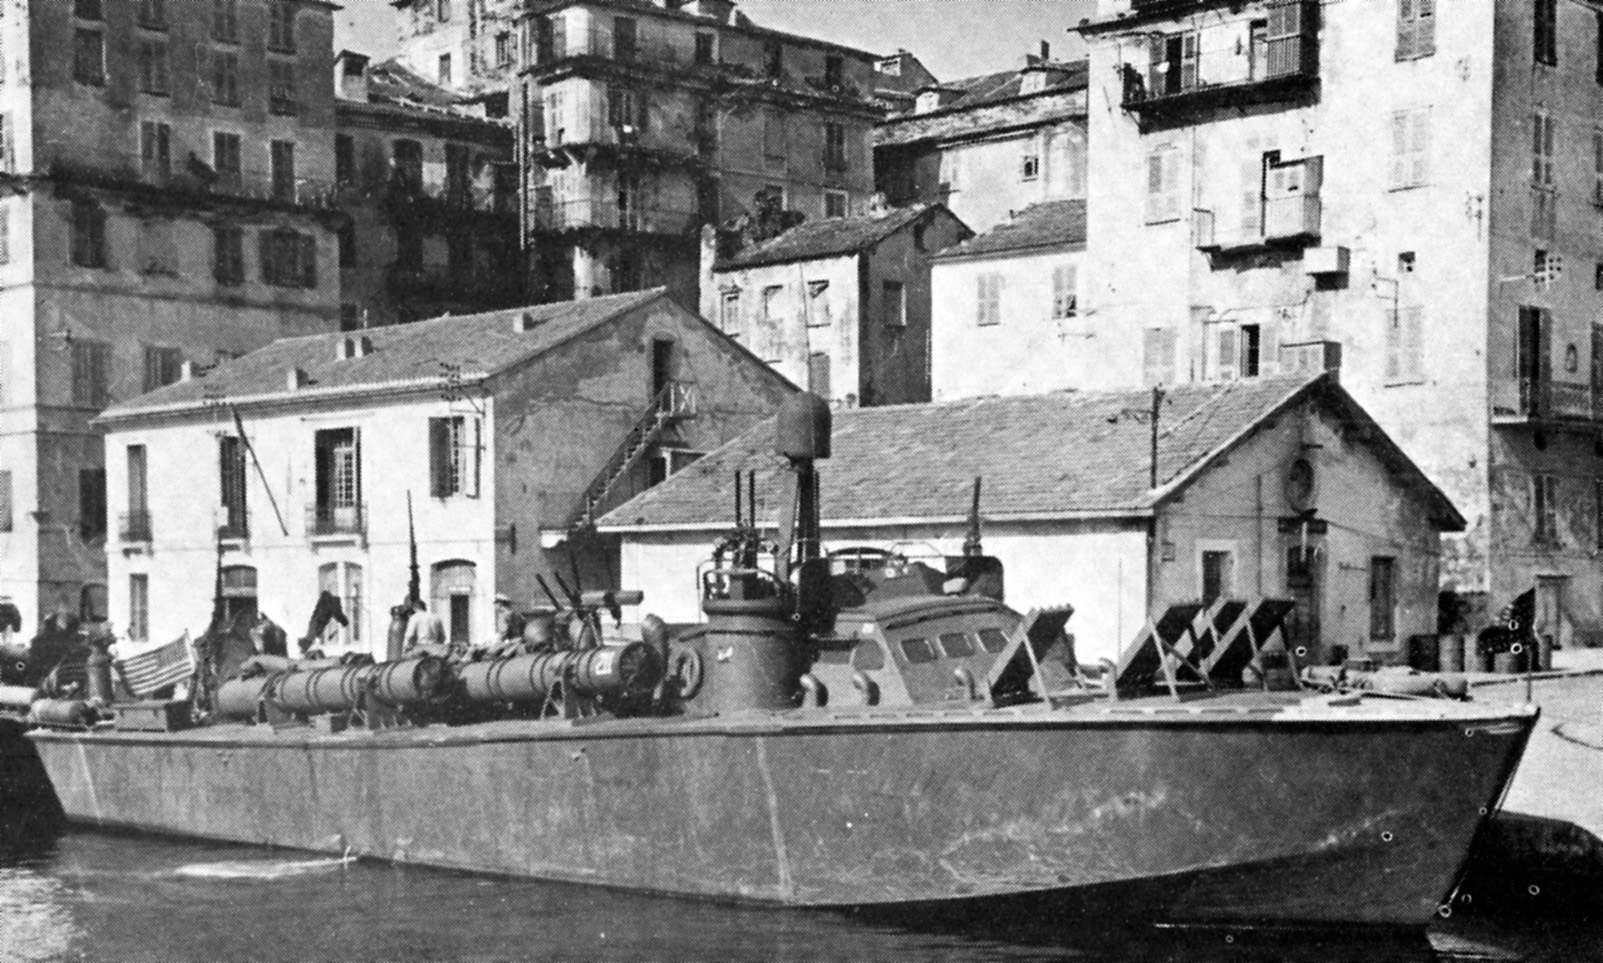 PT 211, one of the PT boats that saw action in Operation Ginny, lies docked at the port of Bastia in February 1944.